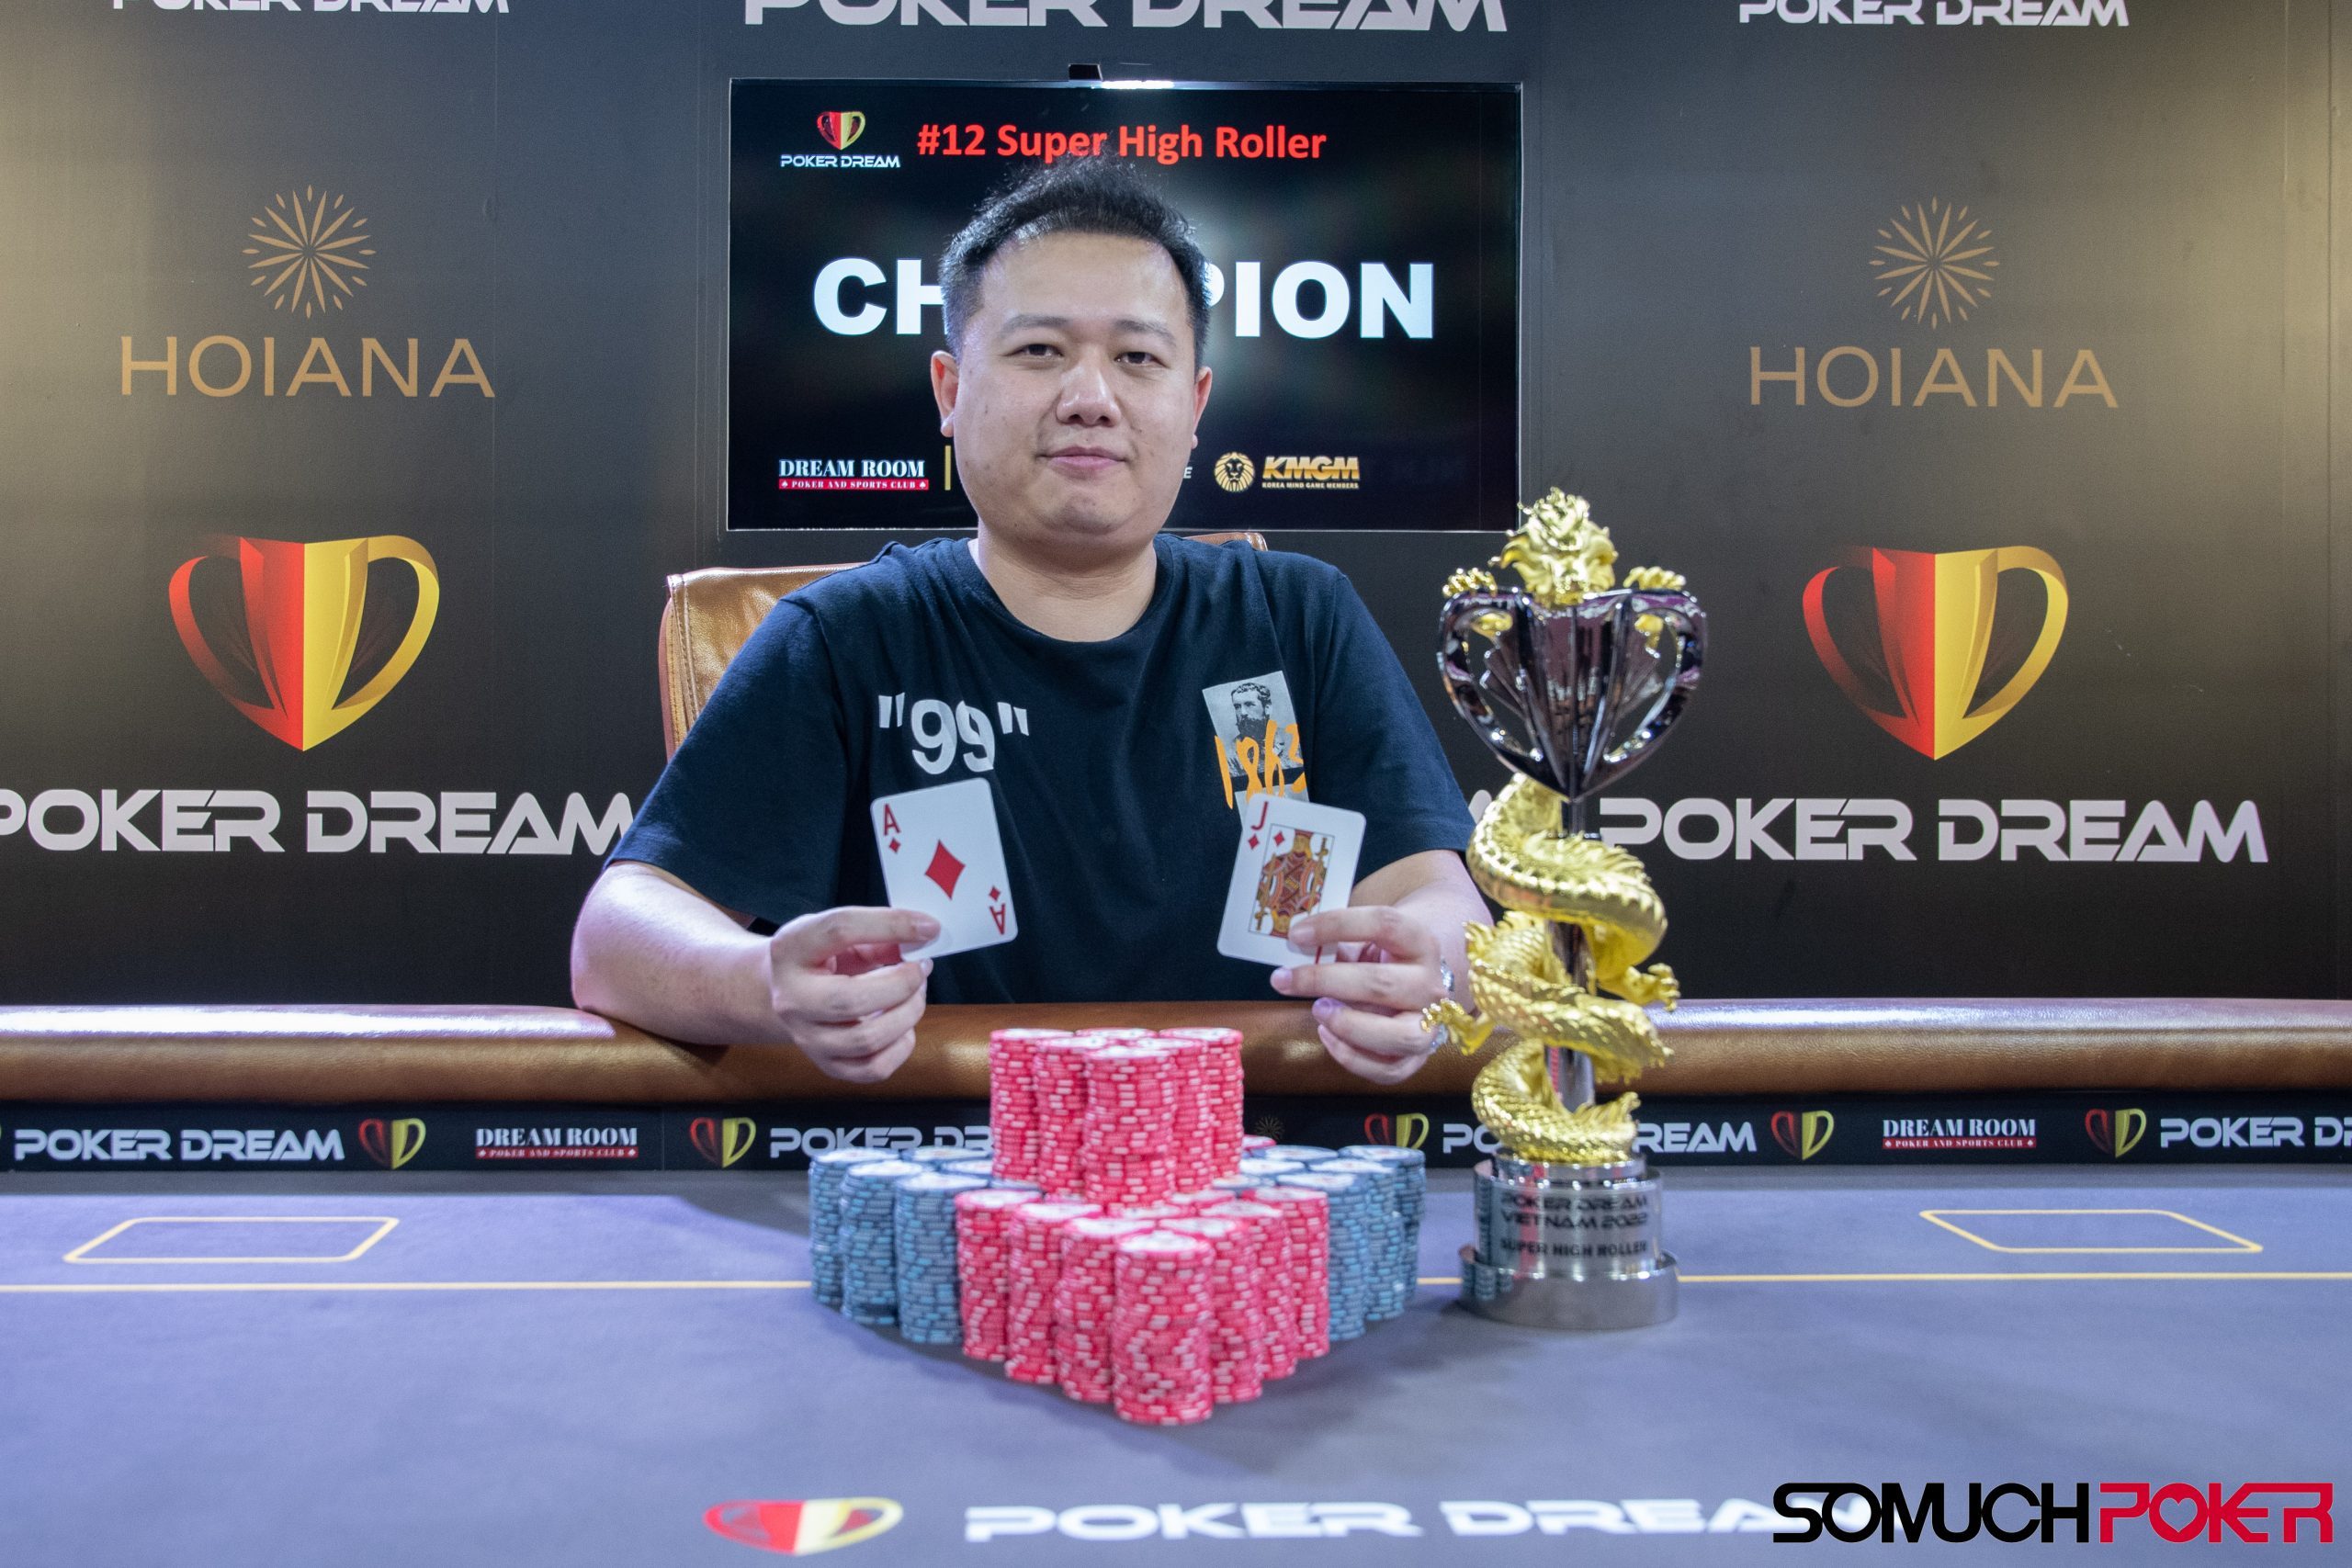 Malaysia's Ewe Eng Soon clinches Poker Dream Vietnam Super High Roller for ₫5.3BN ($215K); Devan Tang creeps up to 2nd place